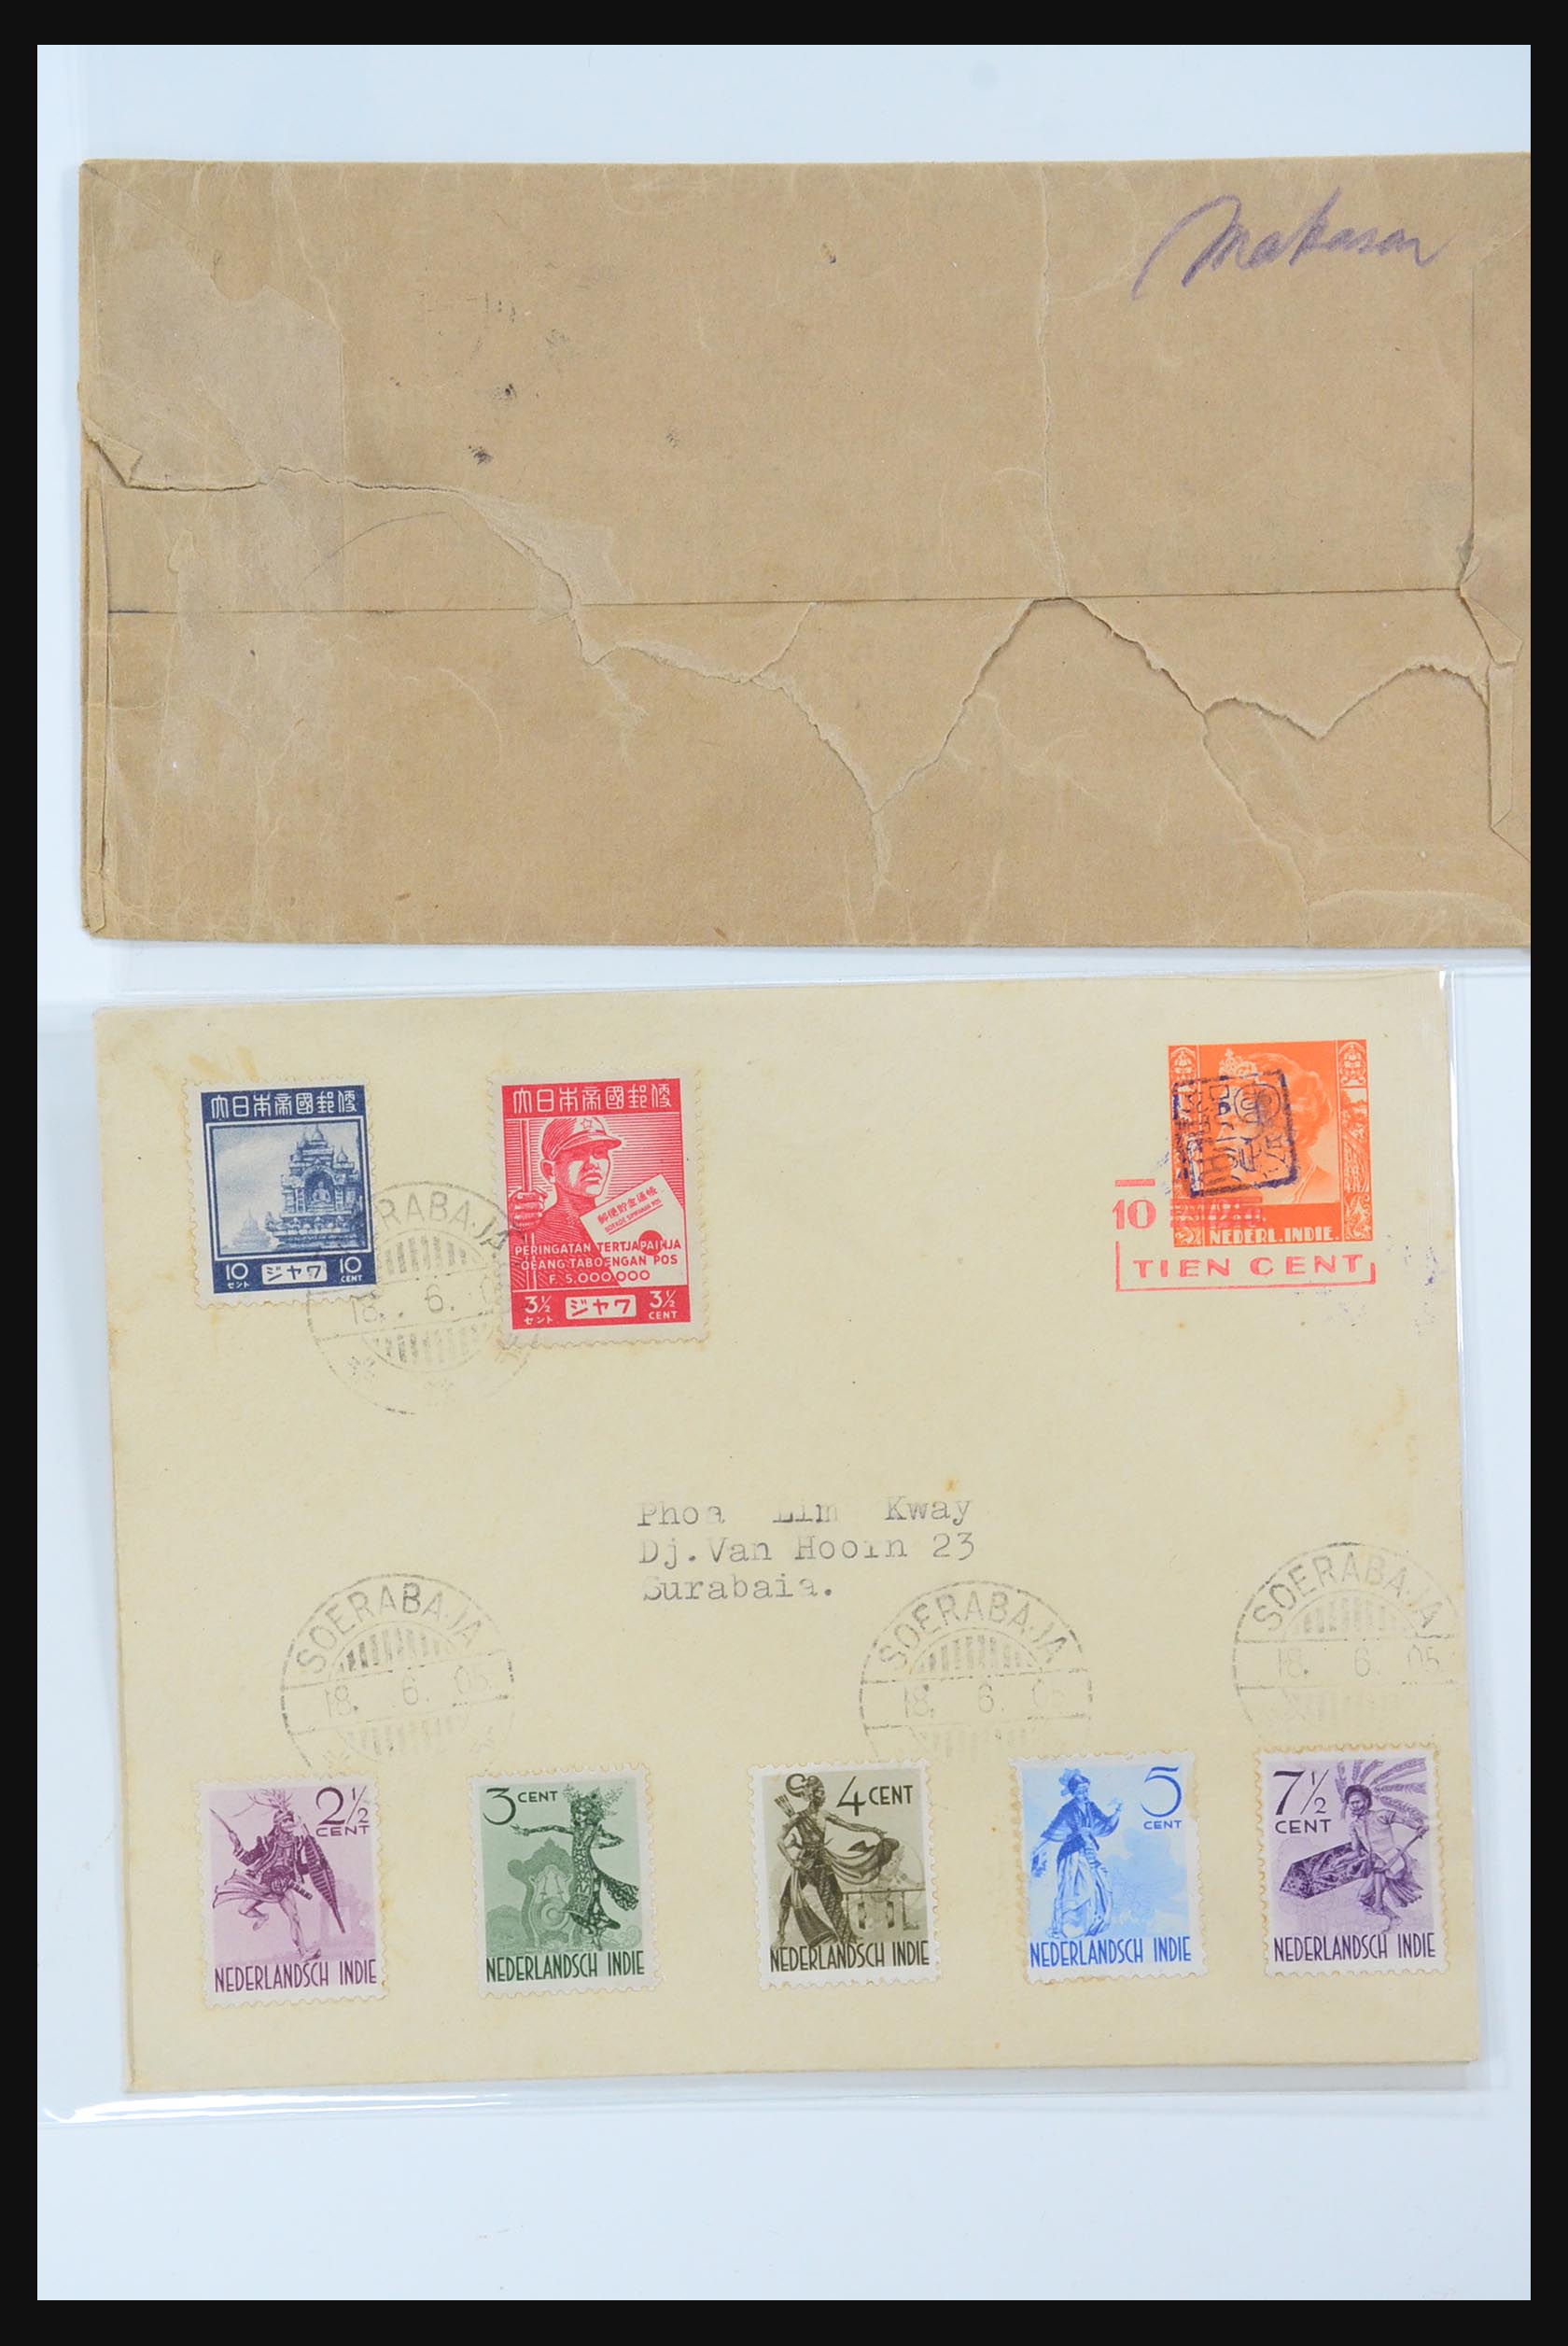 31362 133 - 31362 Netherlands Indies Japanese occupation covers 1942-1945.